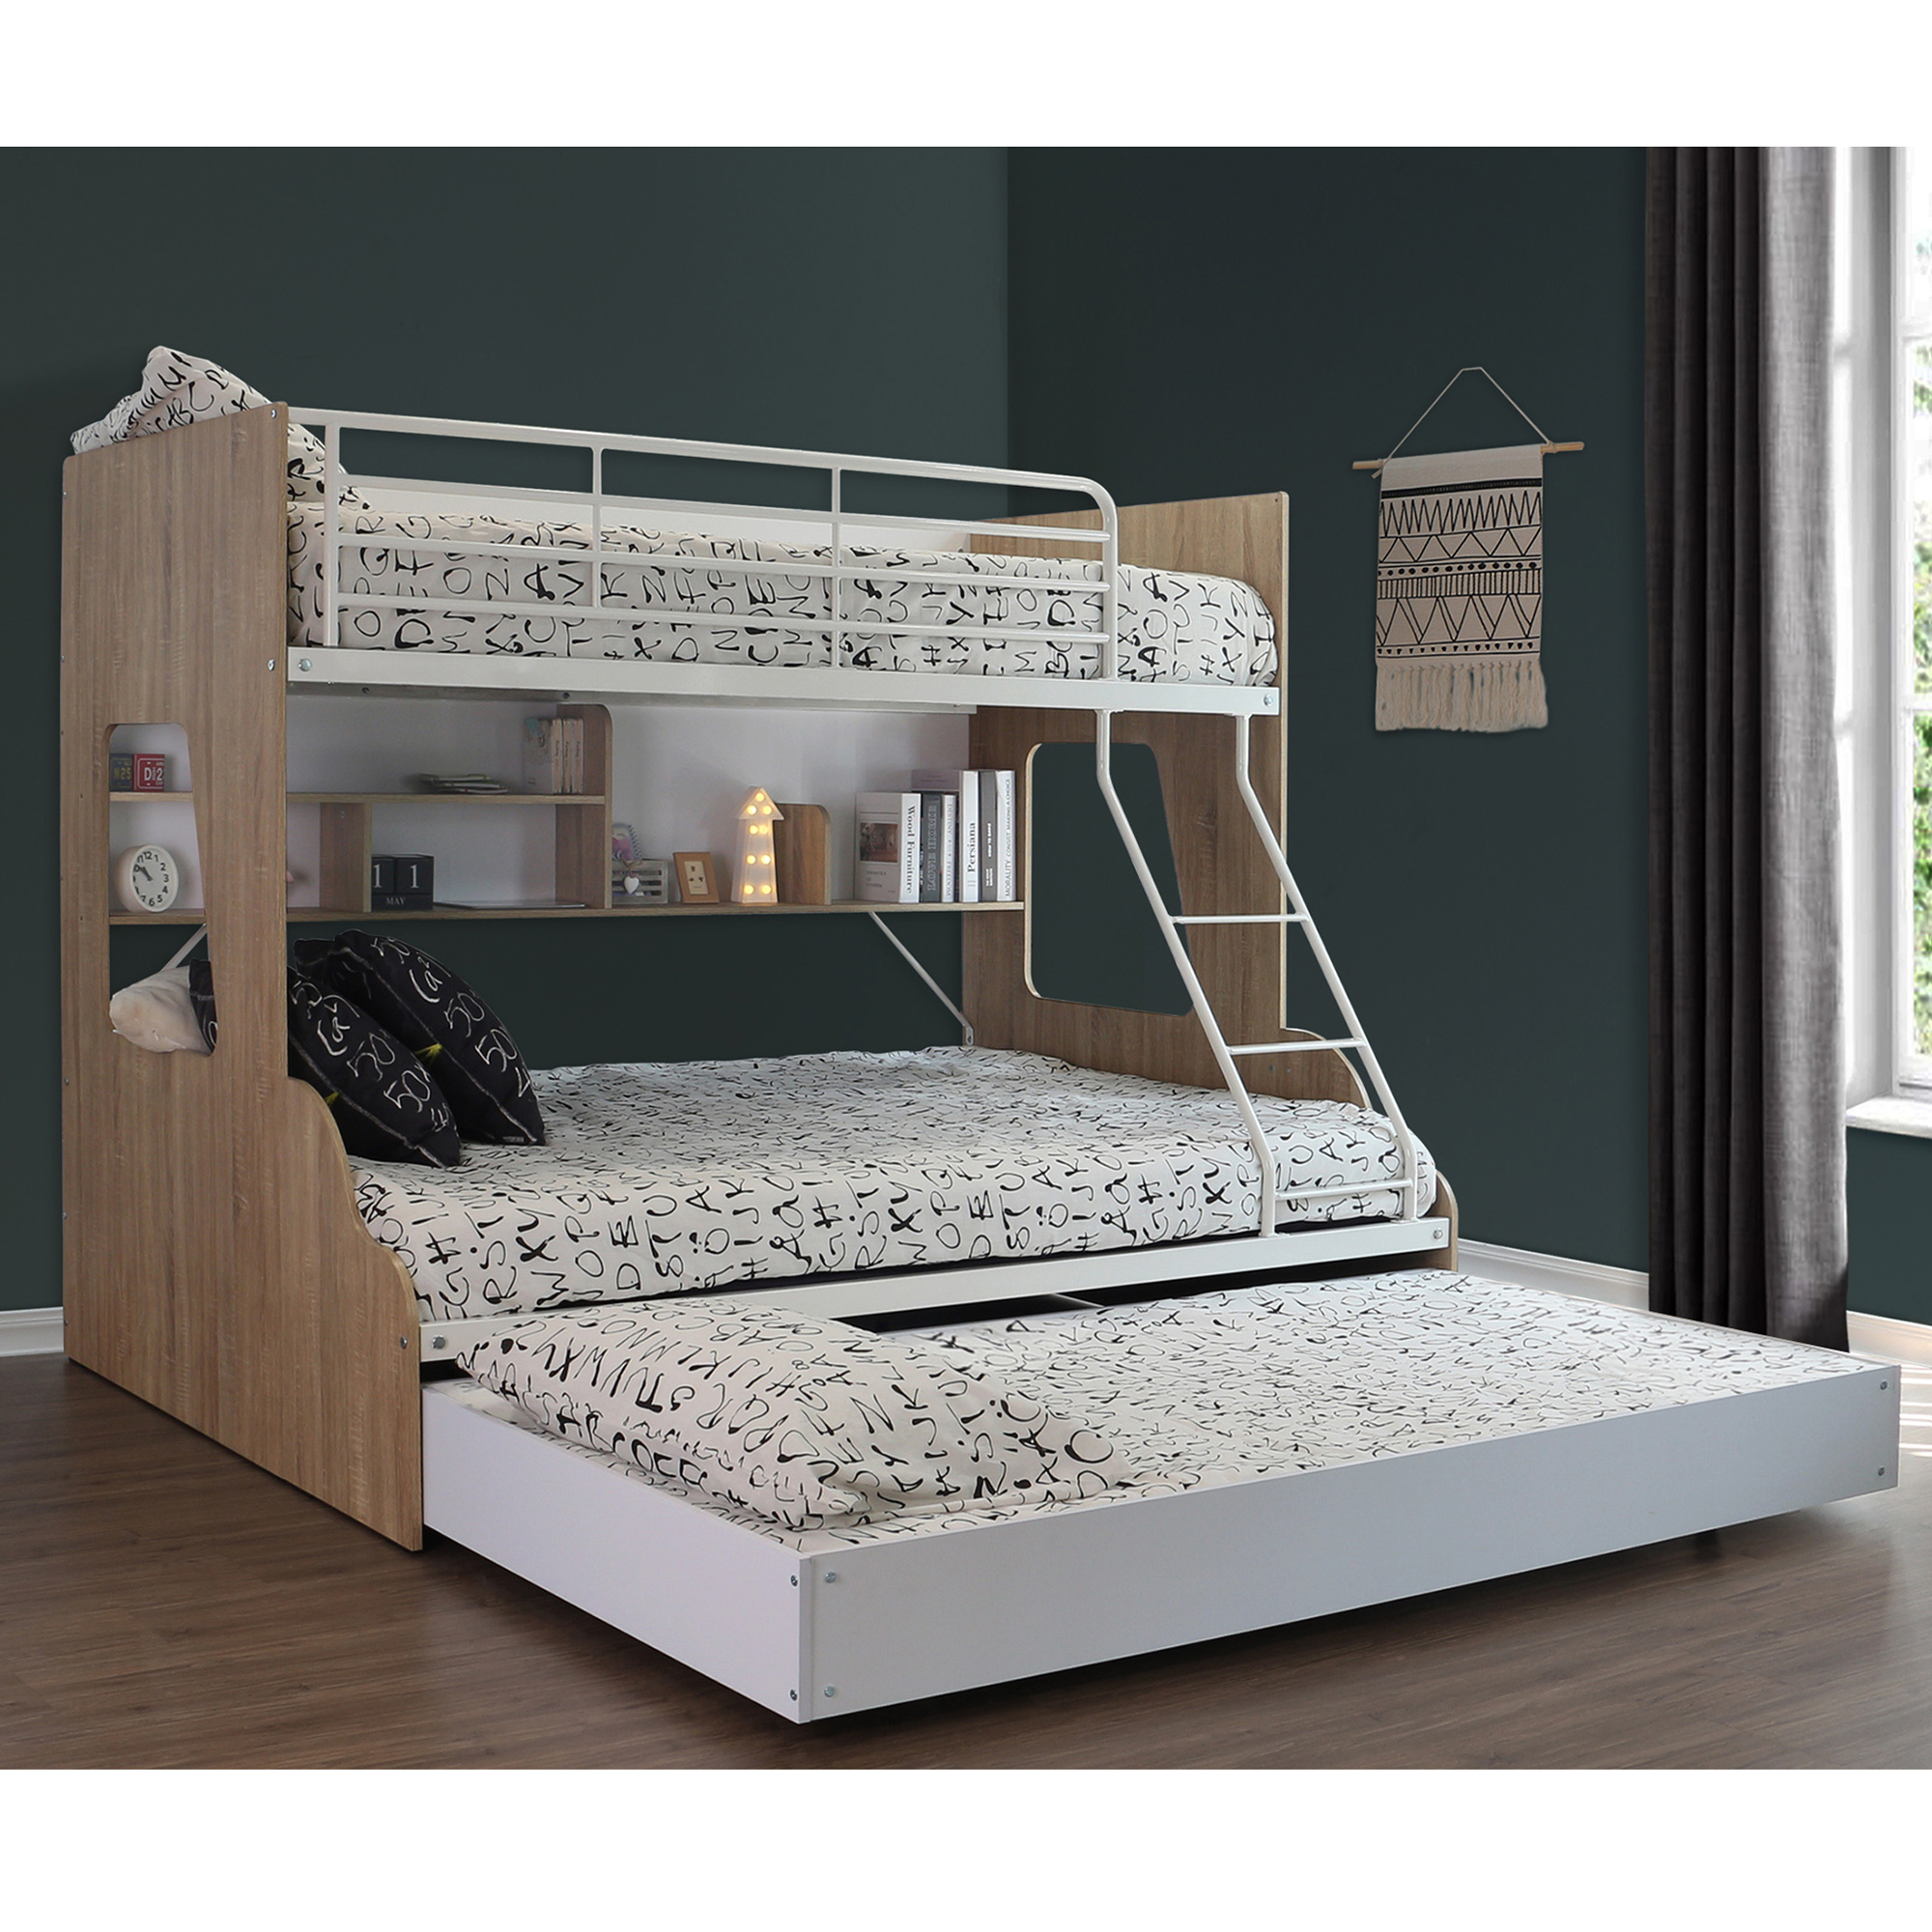 Single Over Double Trio Bunk Bed, Full Size Single Bunk Beds